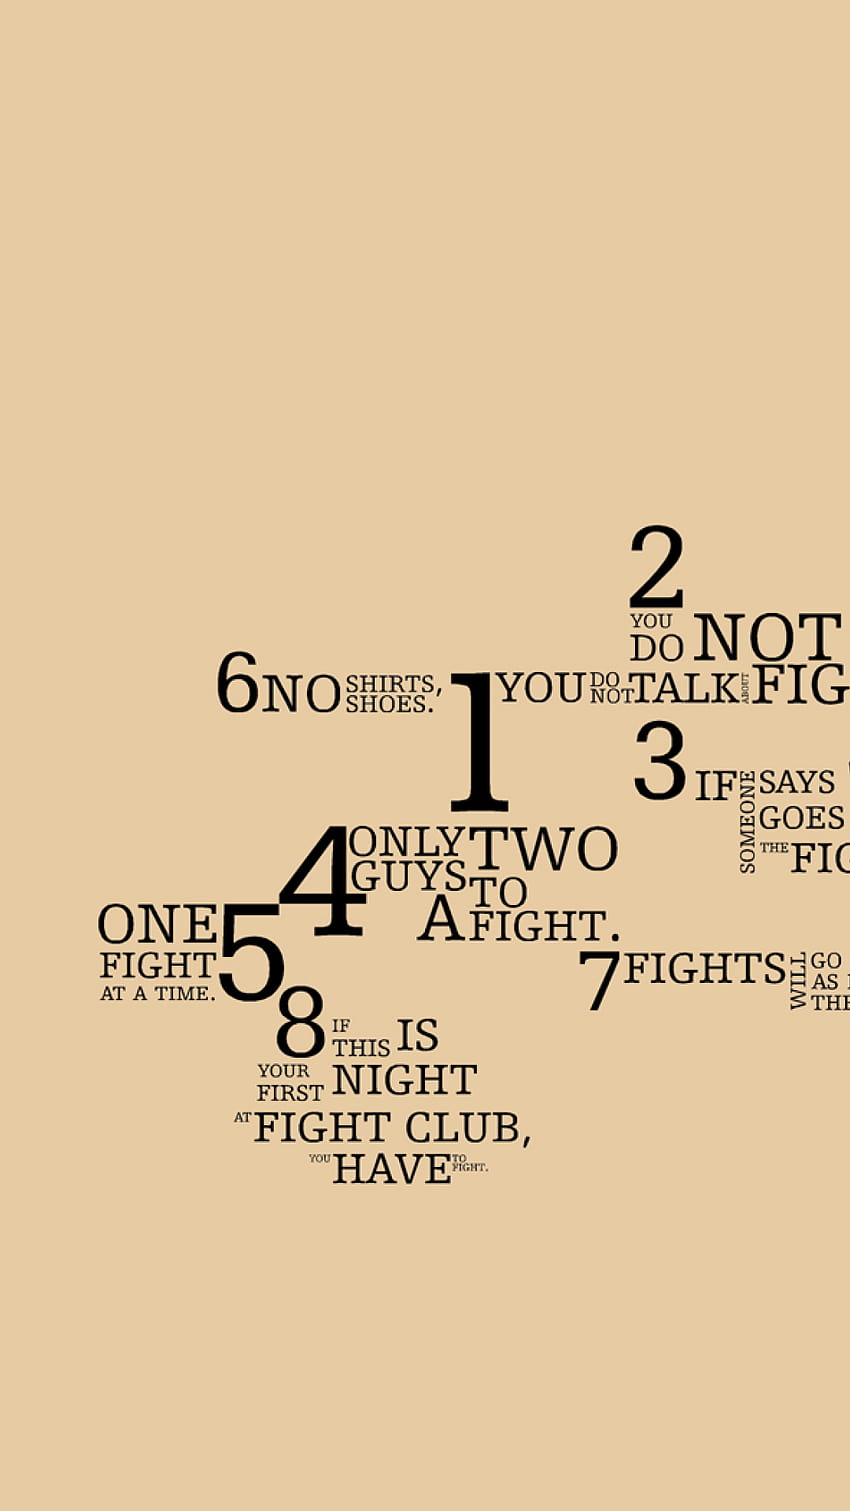 Fight club rules quotes iphone 6 plus 1080x1920 ., fight club quote HD phone wallpaper